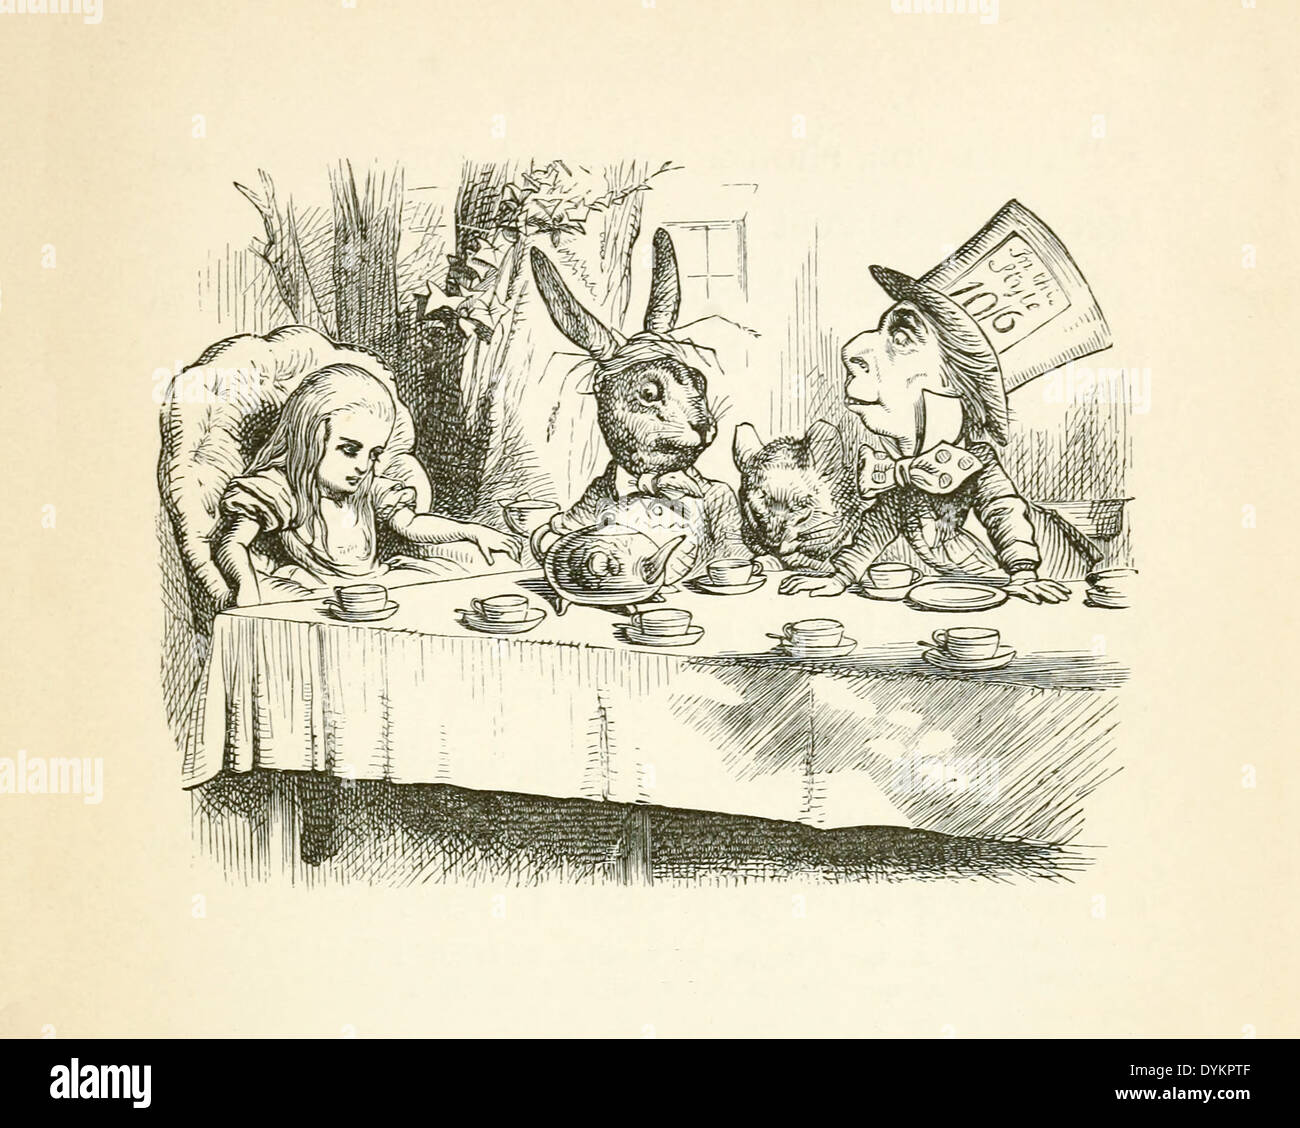 John Tenniel  (1820-1914) illustration from Lewis Carroll's 'Alice in Wonderland' published in 1865. Mad Hatter's tea party Stock Photo